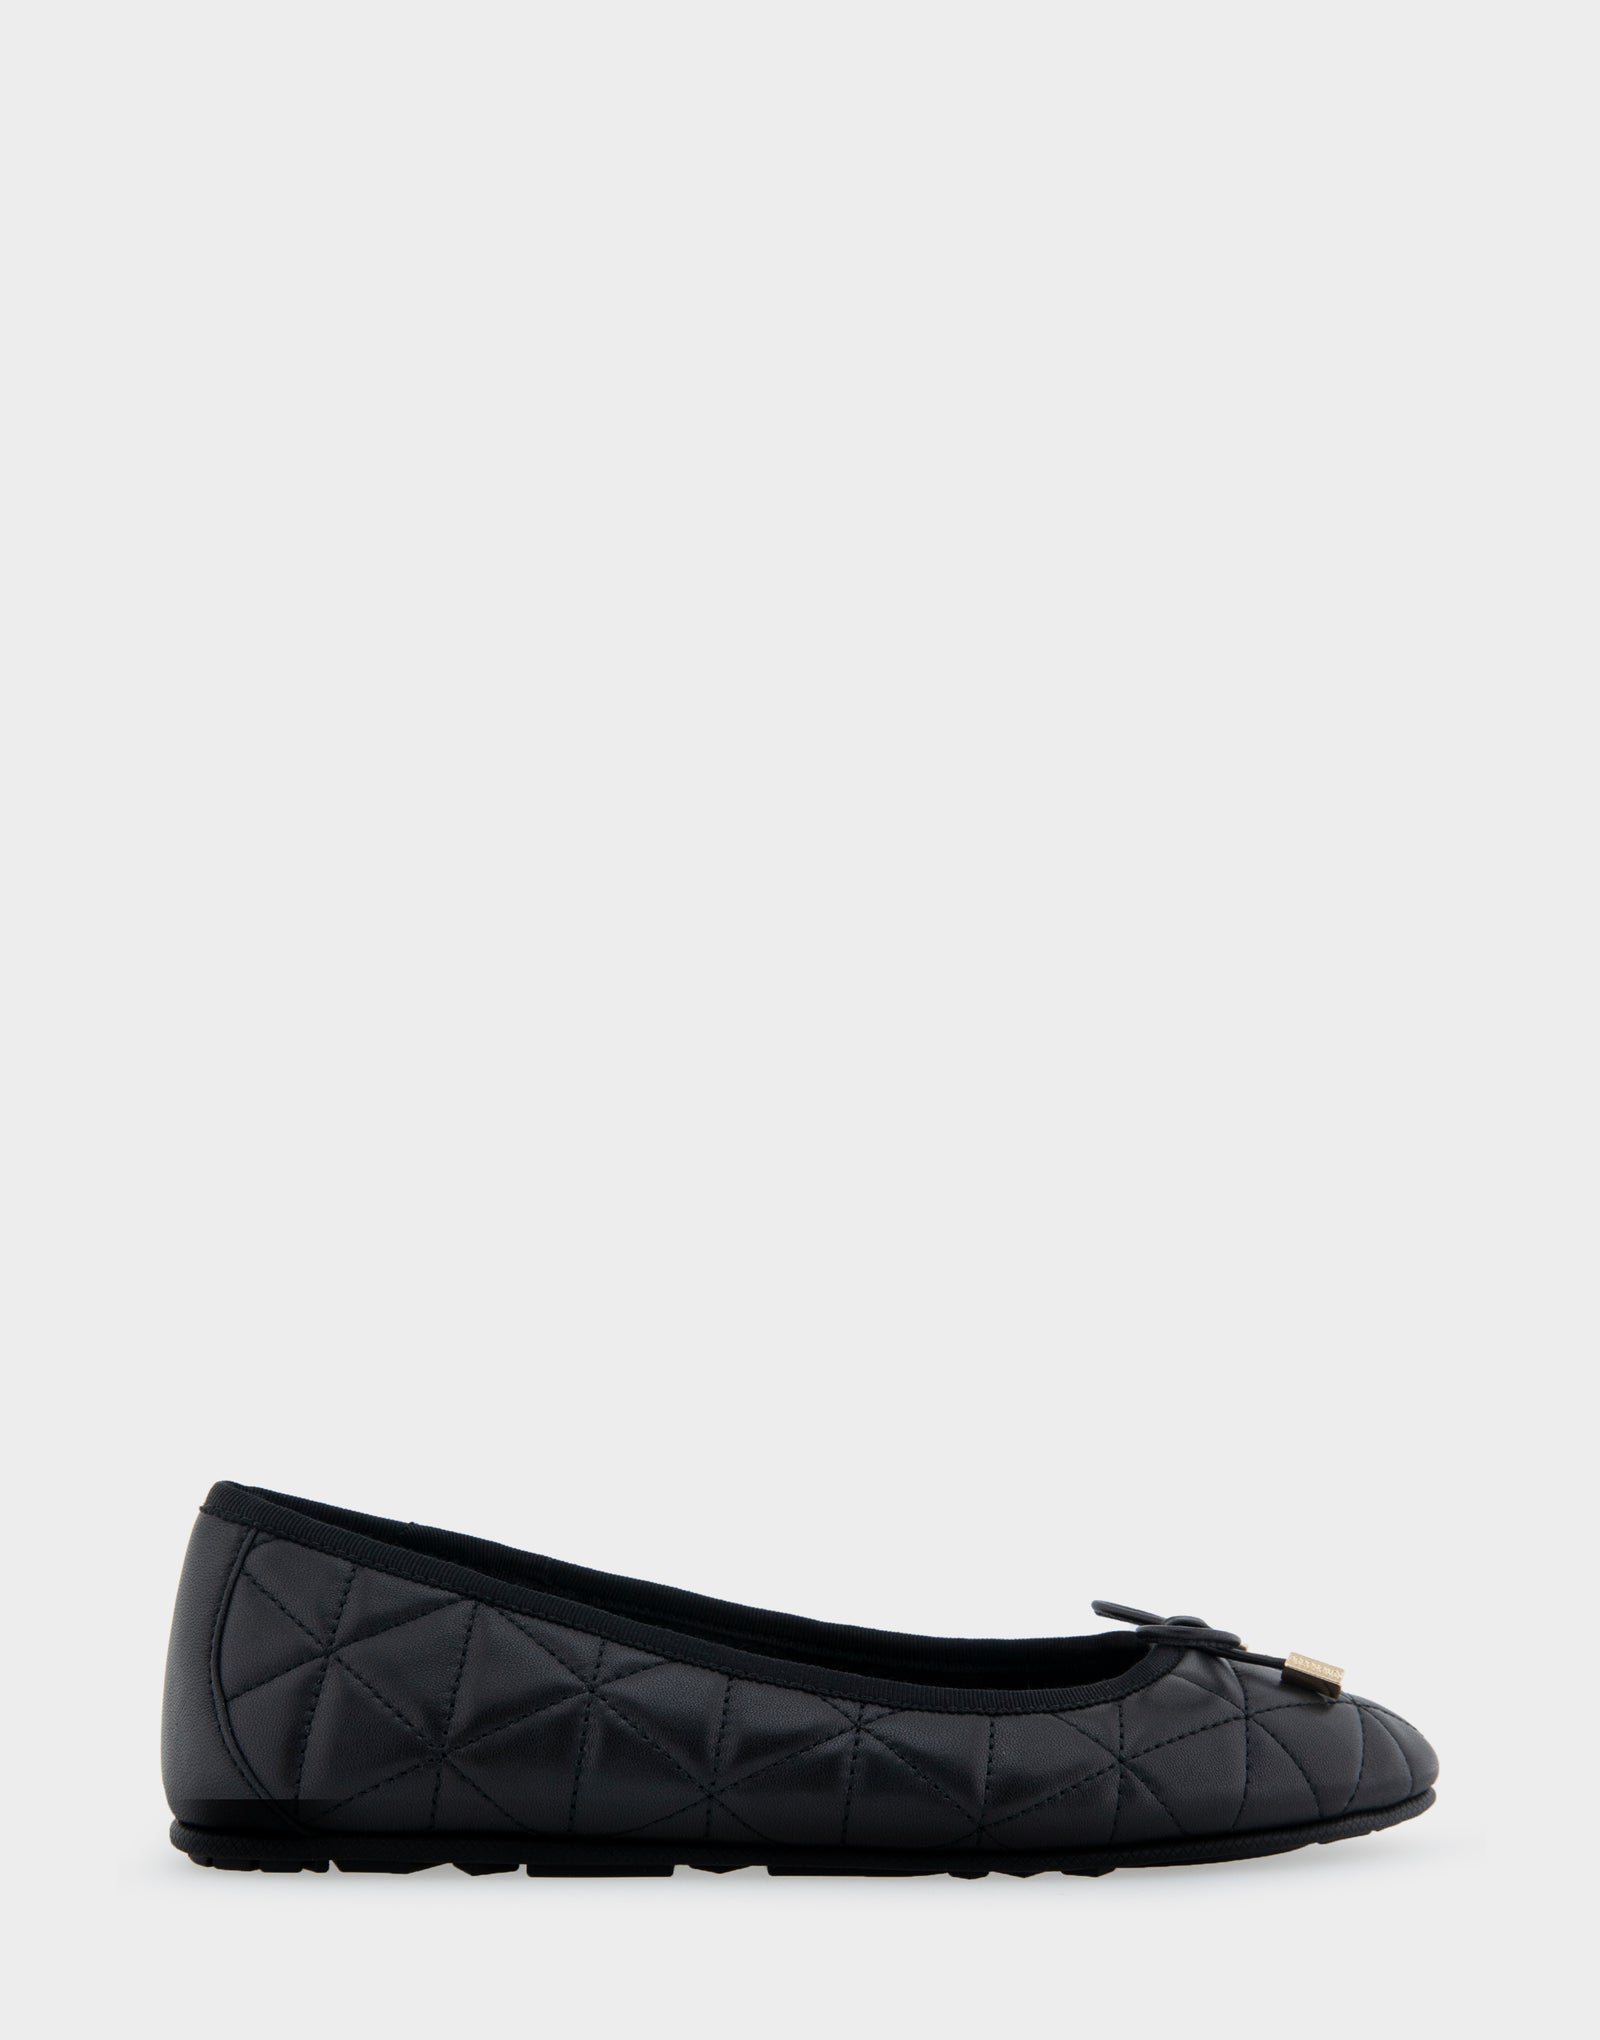 Women's Ballet Flat in Black Quilted Leather